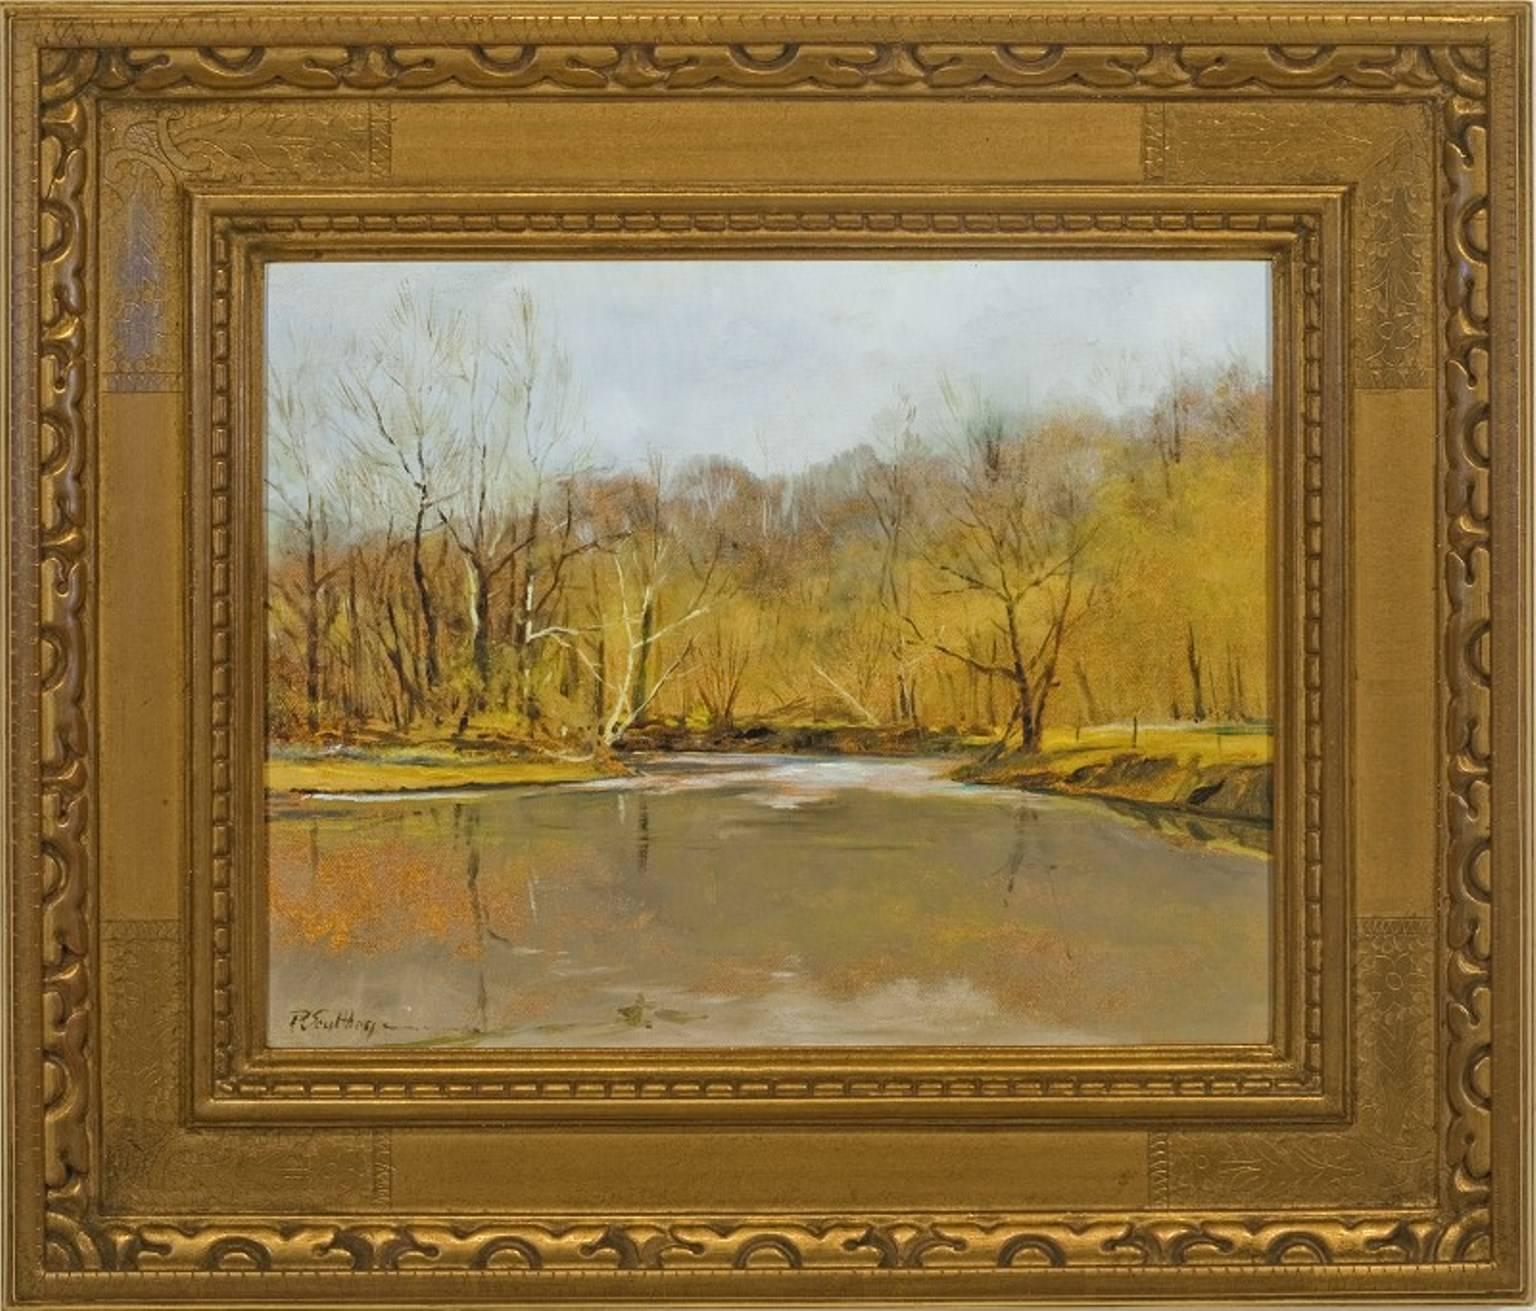 Peter Sculthorpe Landscape Painting - "May"